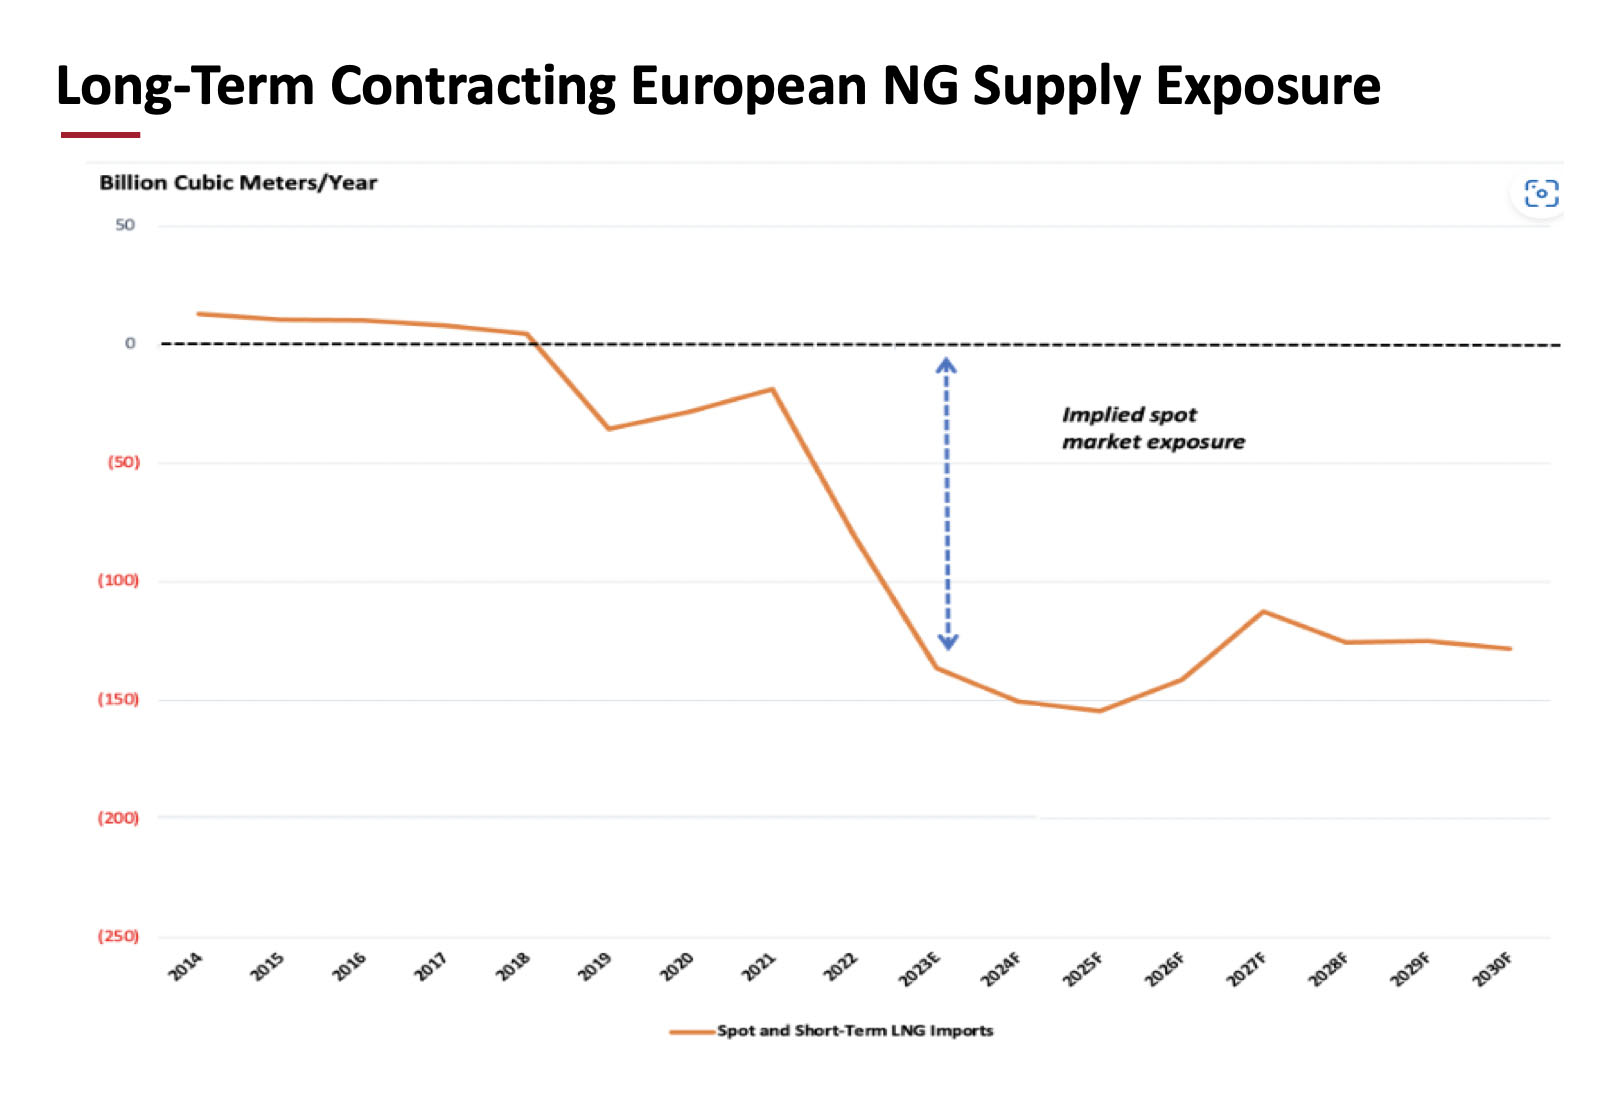 Long term LNG contracts